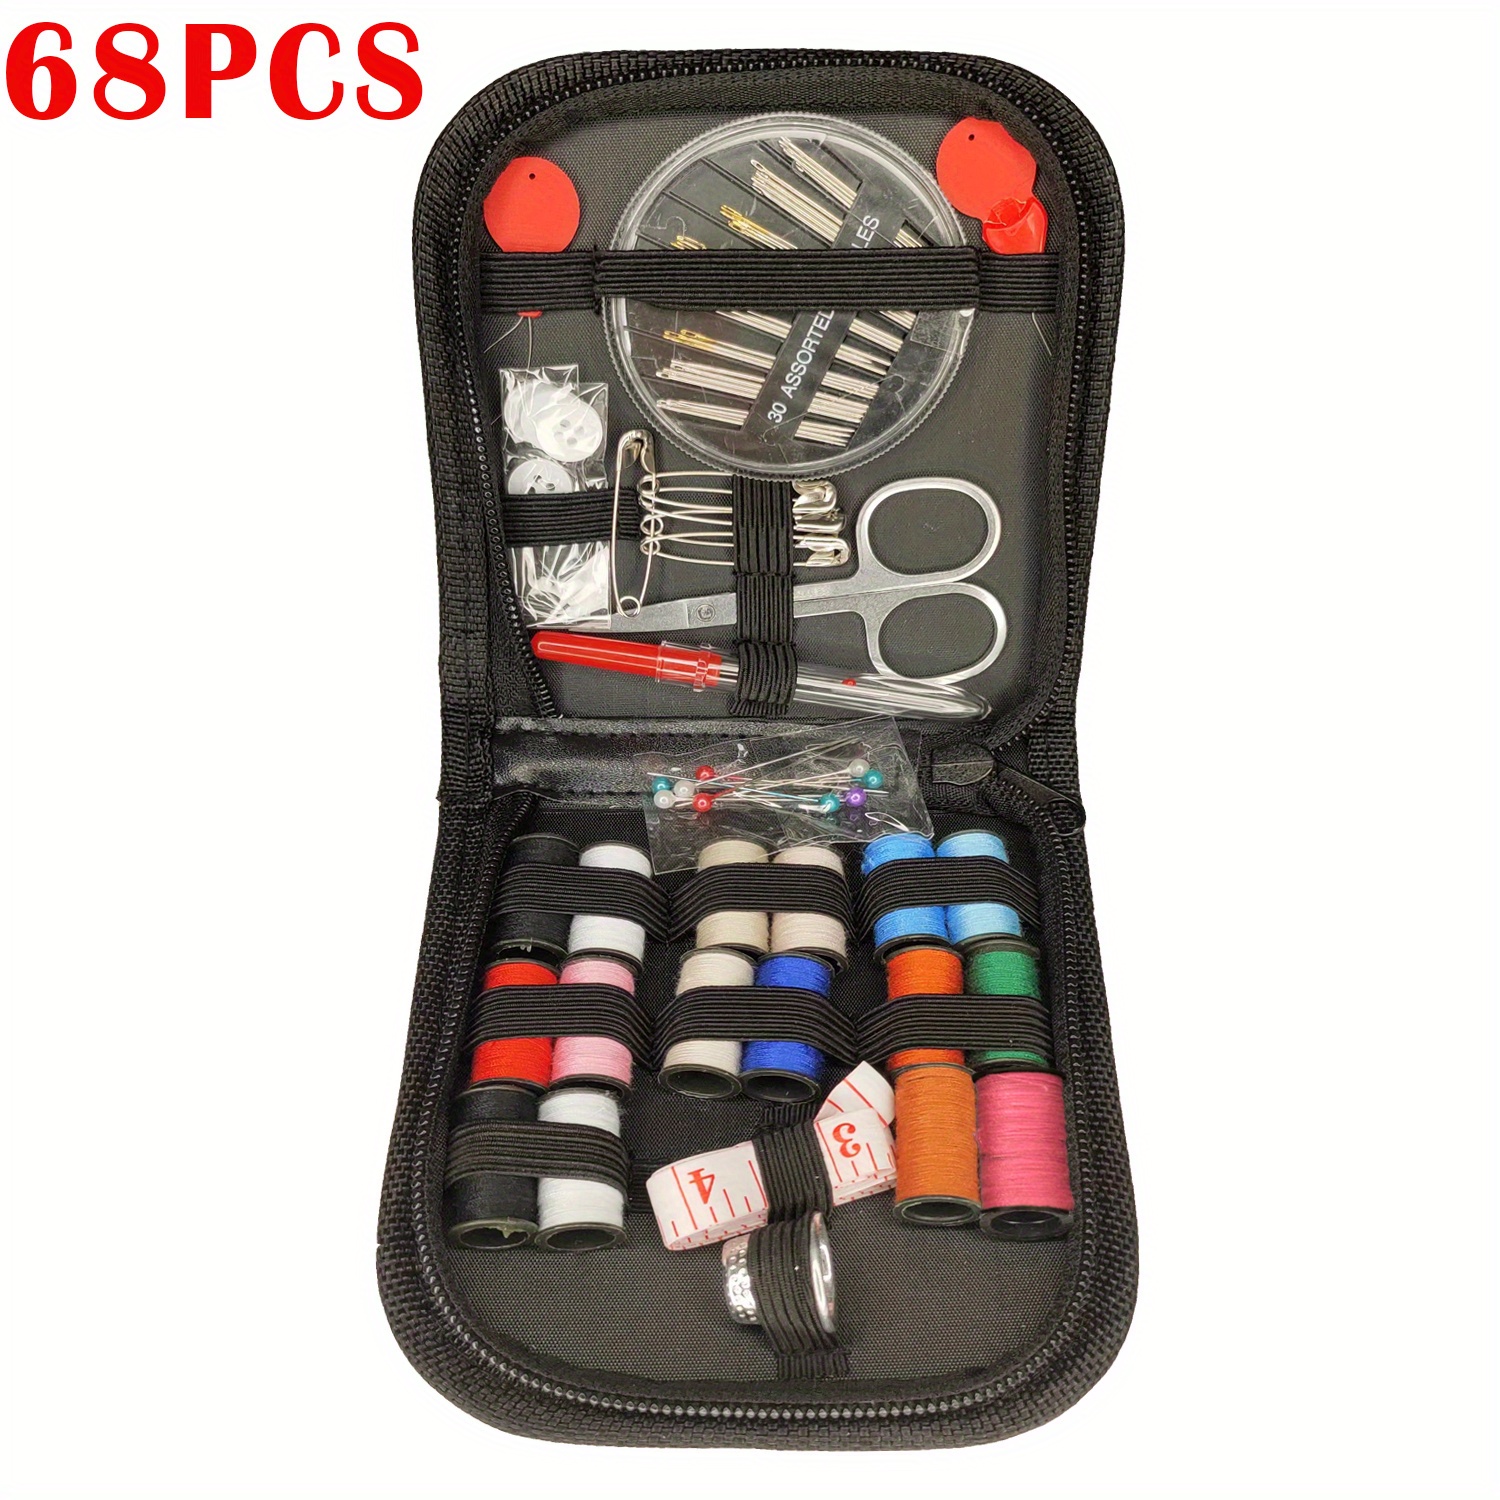 This handy little travel sewing kit is perfect for taking sewing